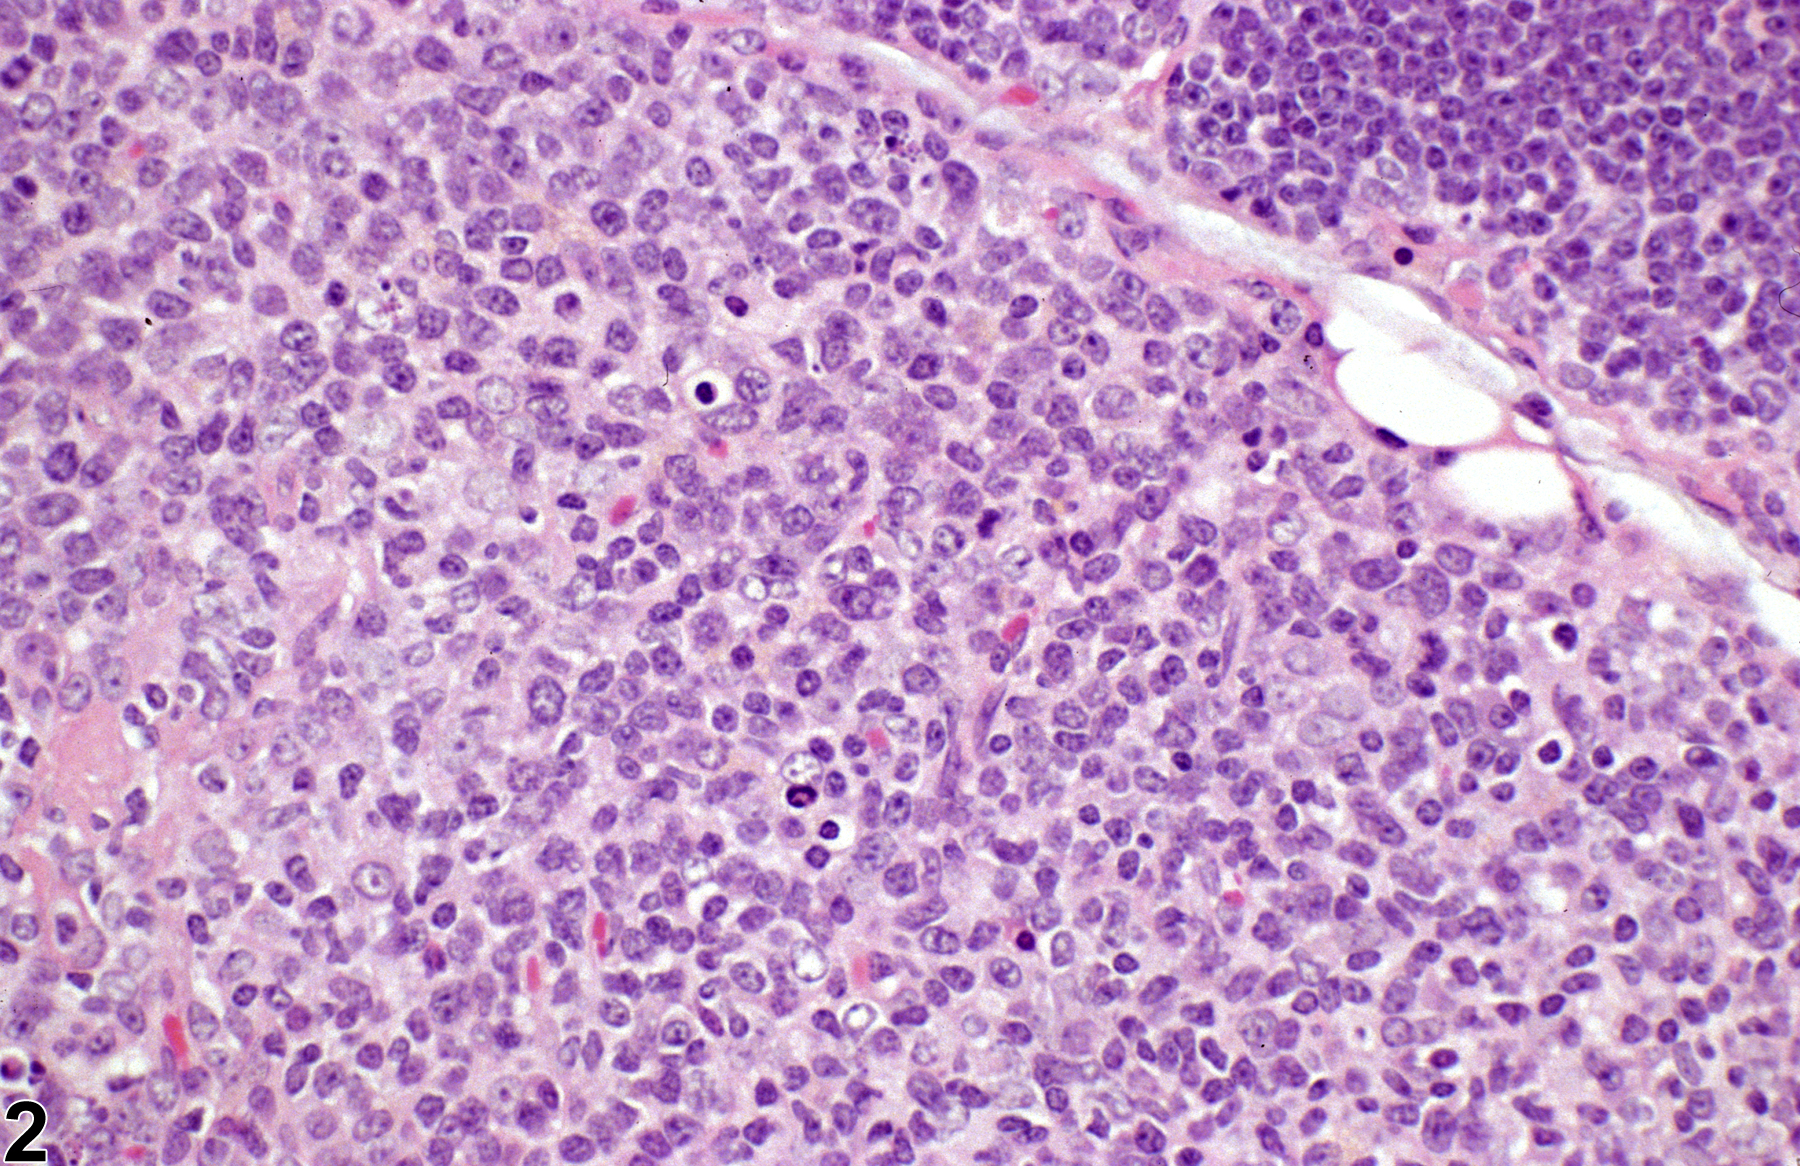 Image of atypical hyperplasia, lymphocyte in the thymus from a female p53+/- (C57Bl/6) mouse in a subchronic study